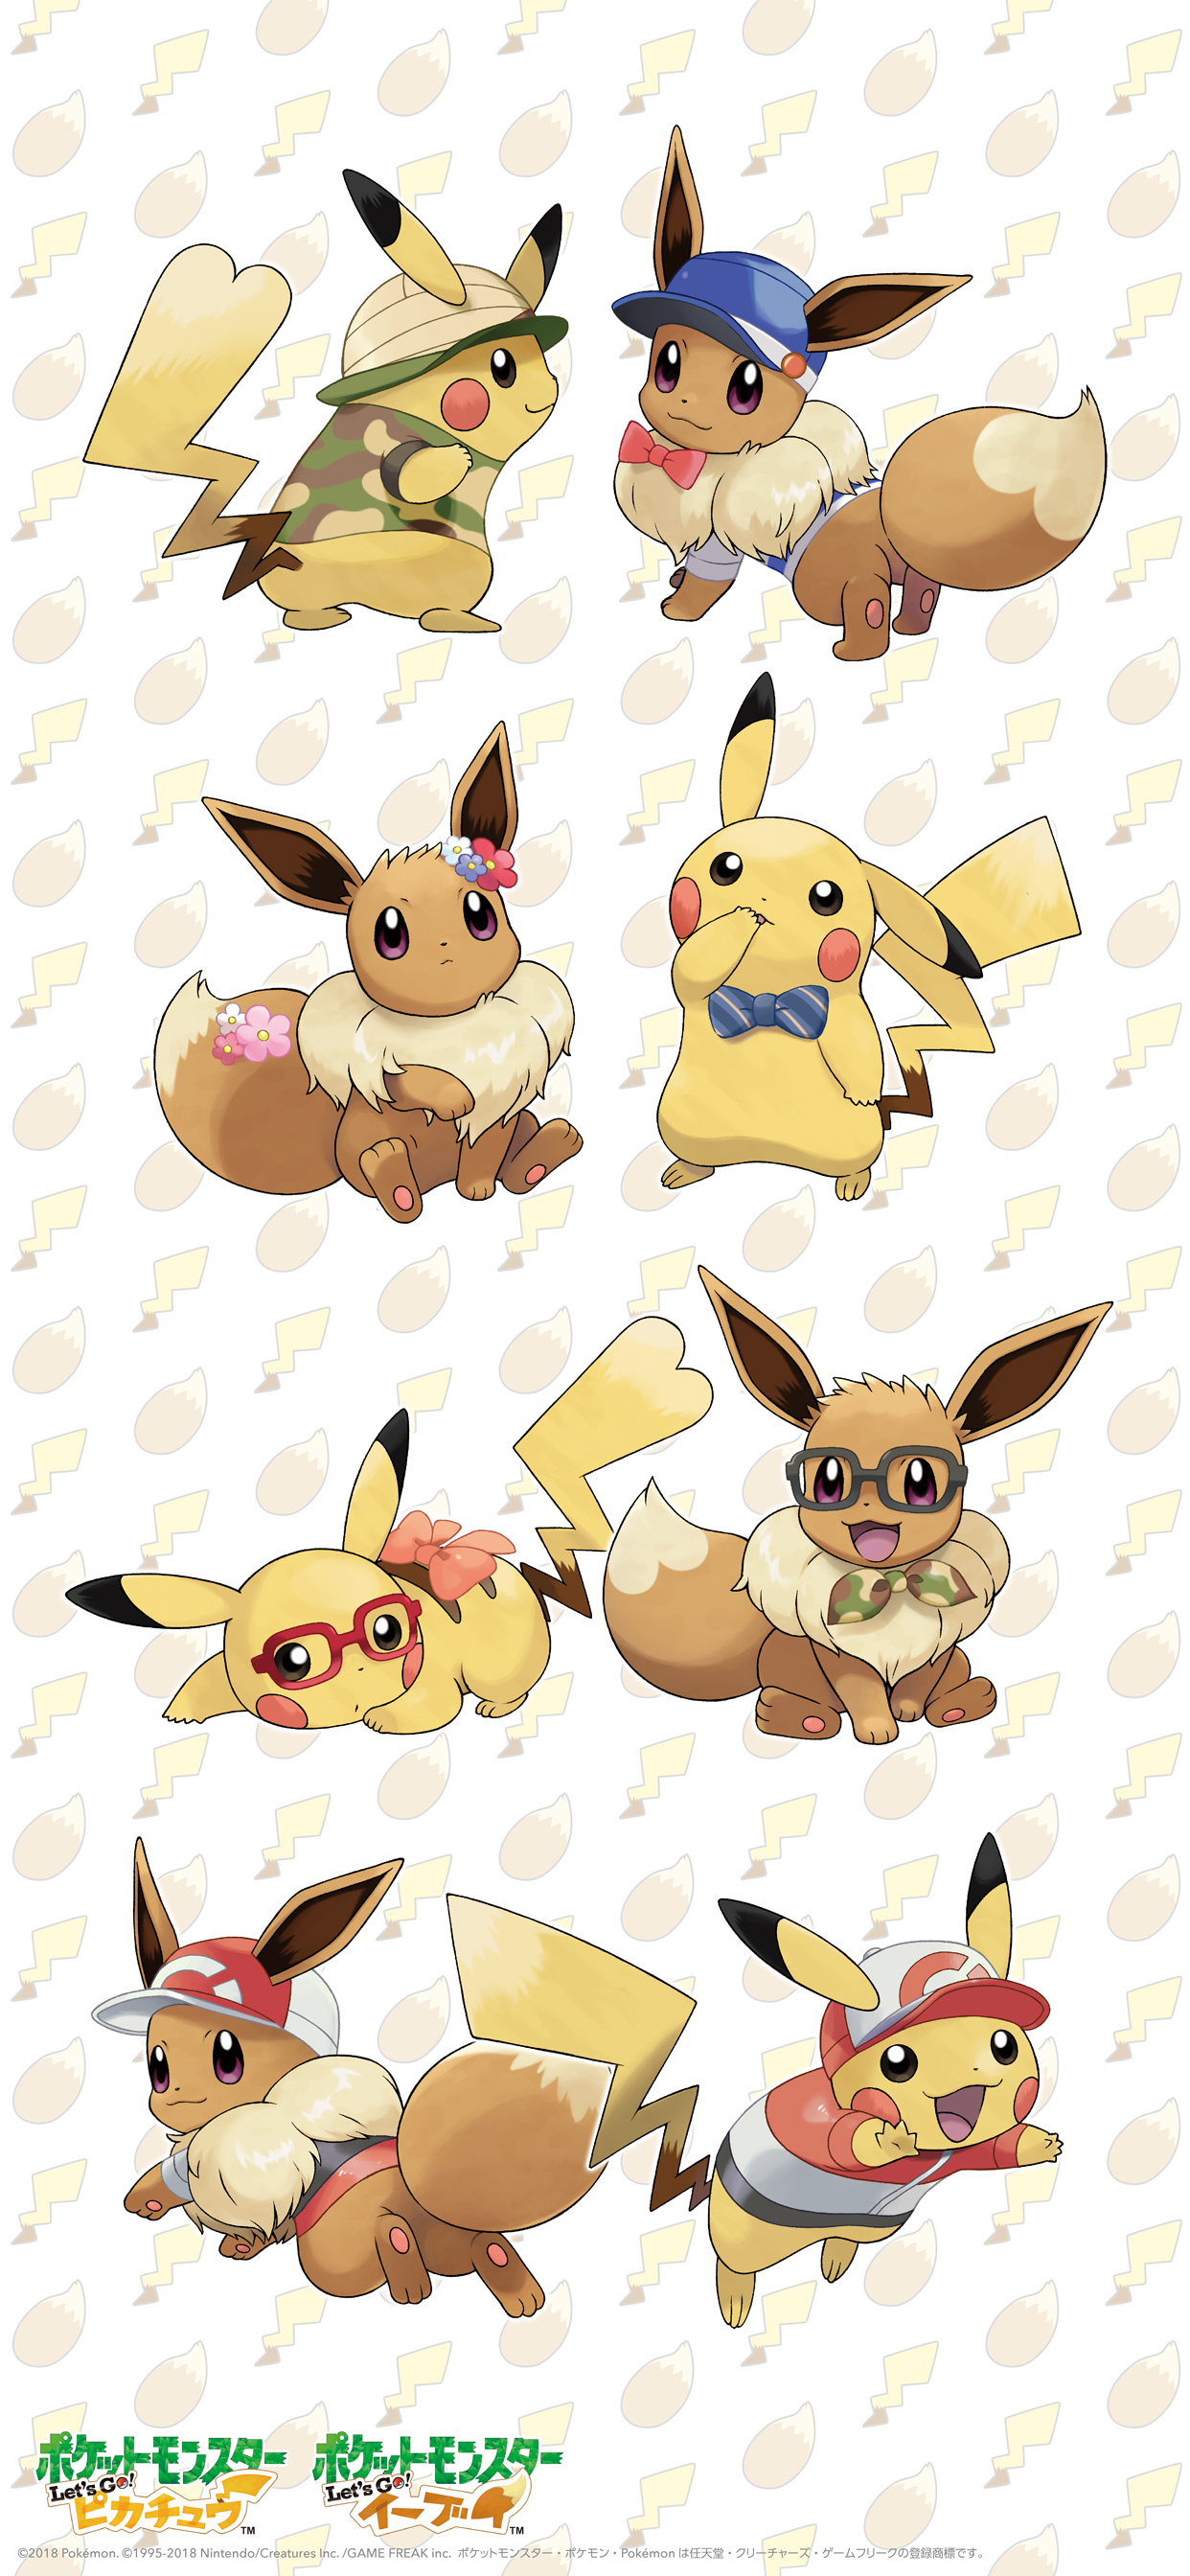 Download This Pokemon Lets Go Pikachueevee Wallpaper For